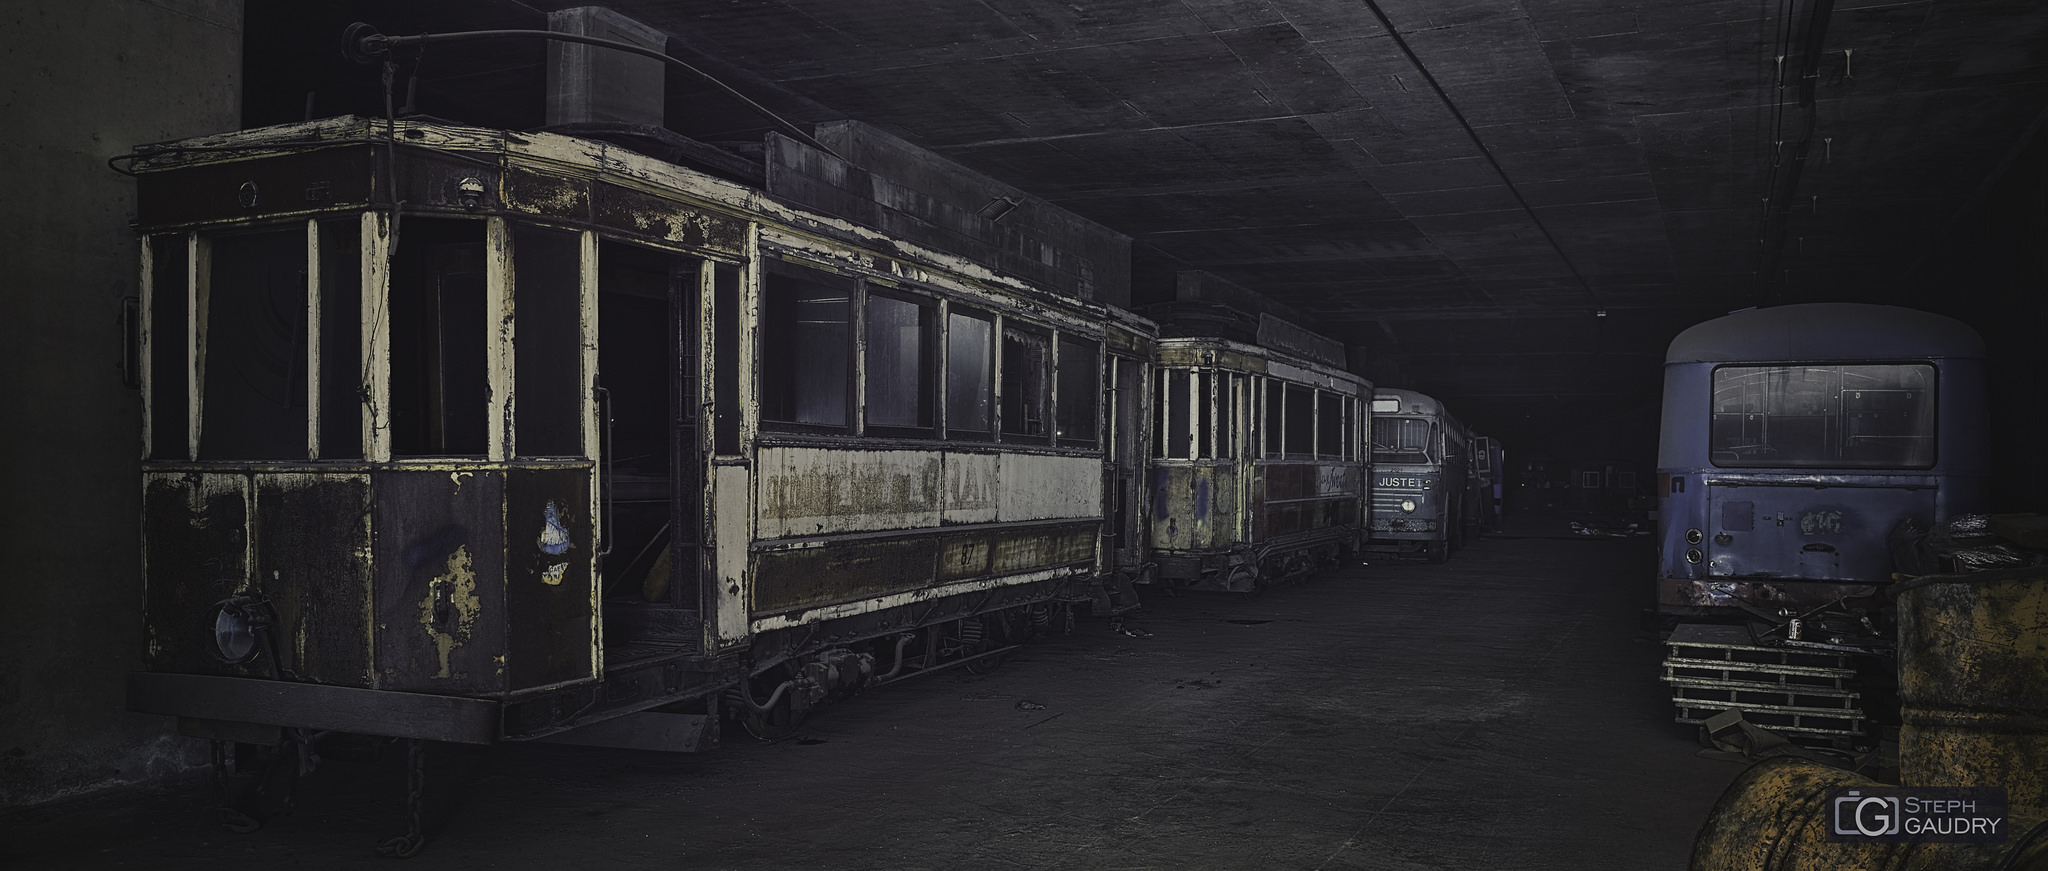 Lost city / The abandoned streetcars